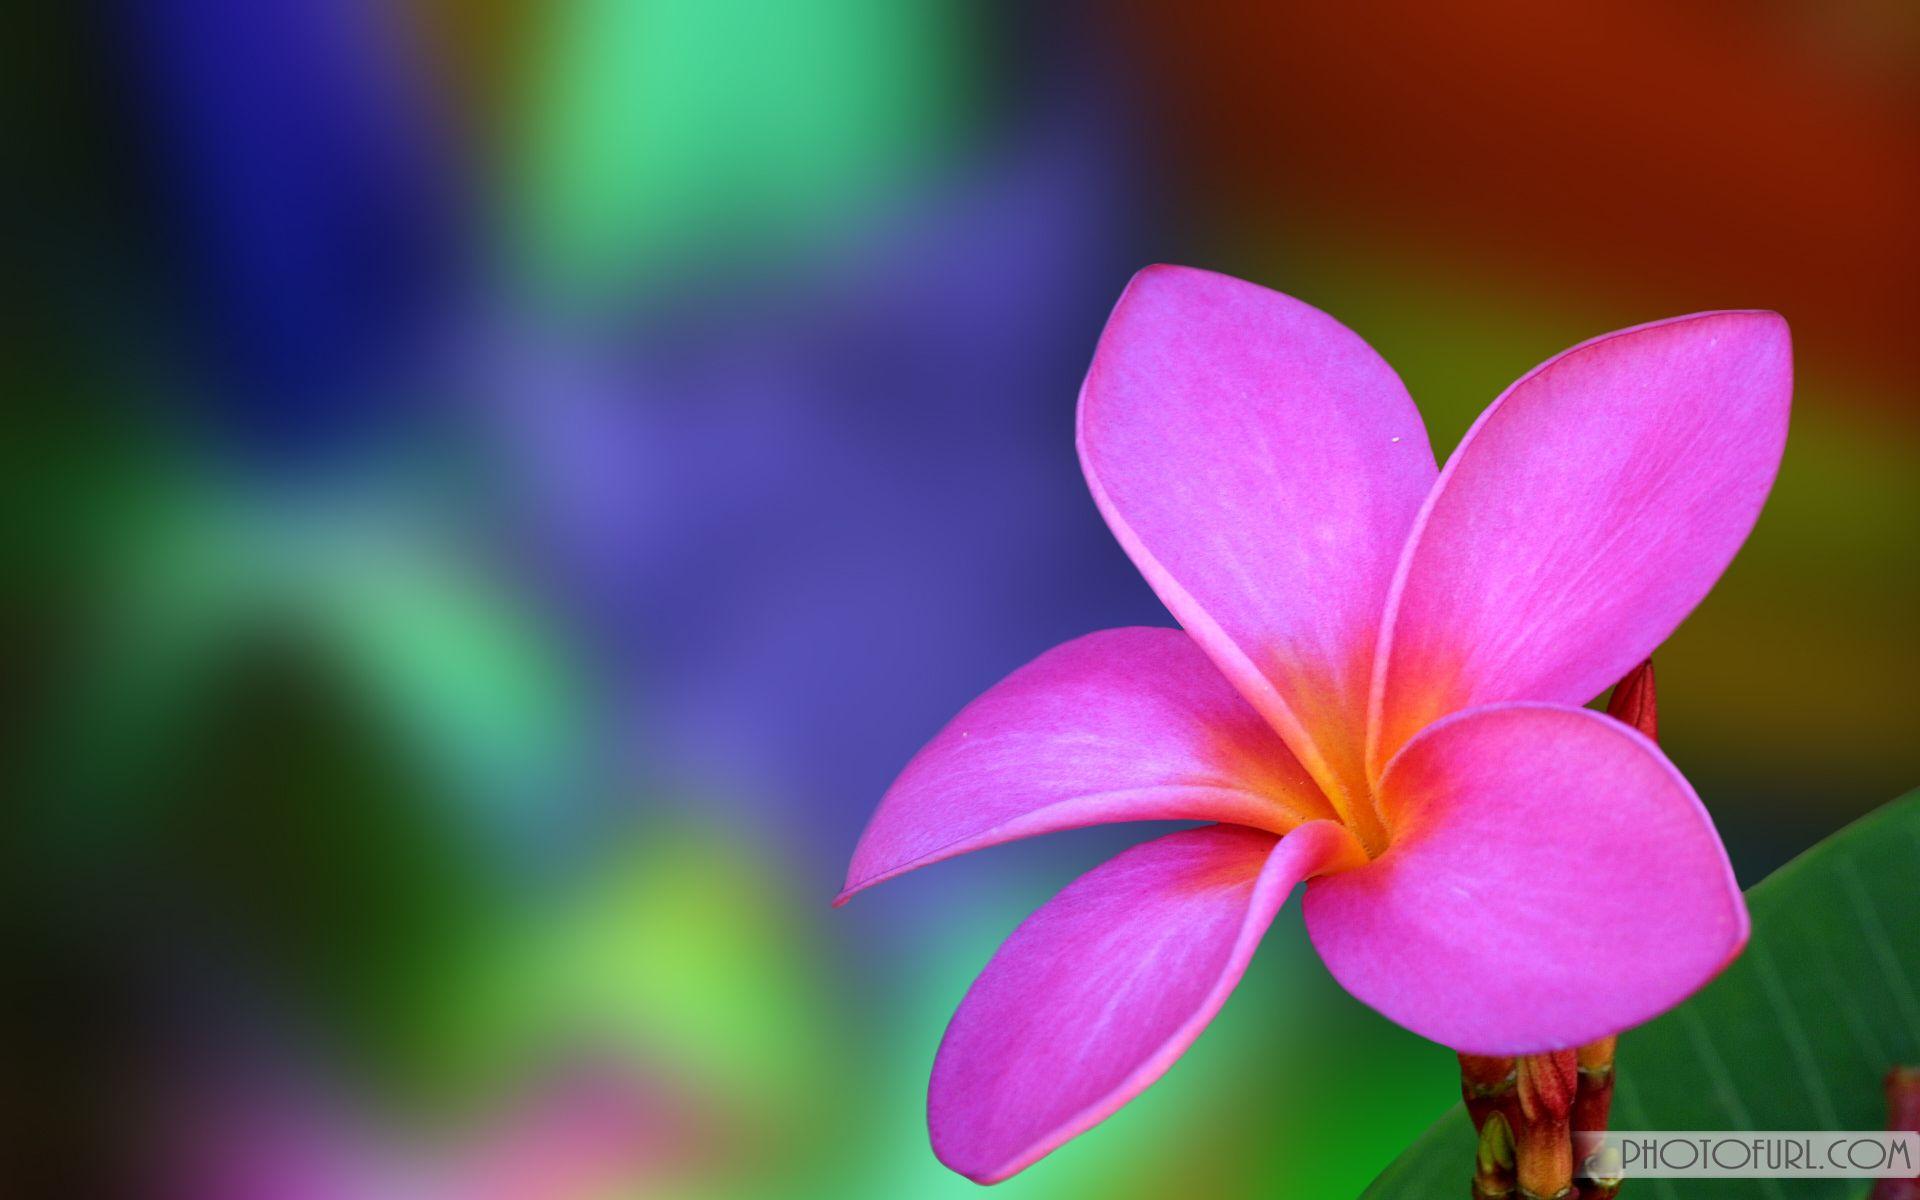 The Most Beautiful And Colorful Flowers Wallpaper For Computer